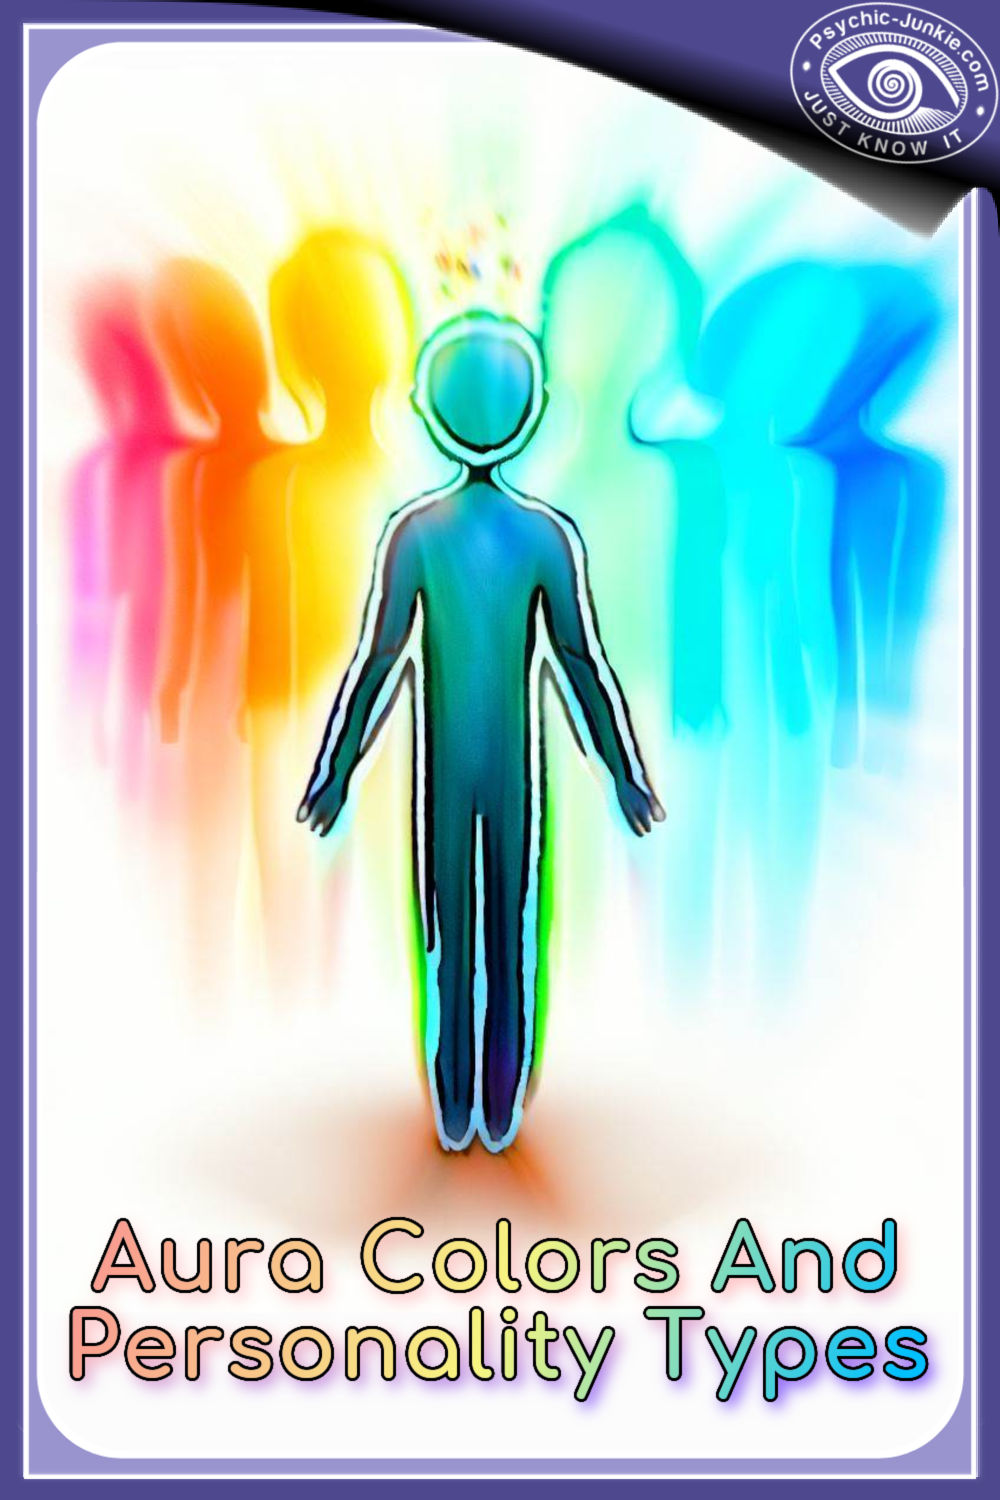 Find out what these aura personality types say about the people you know